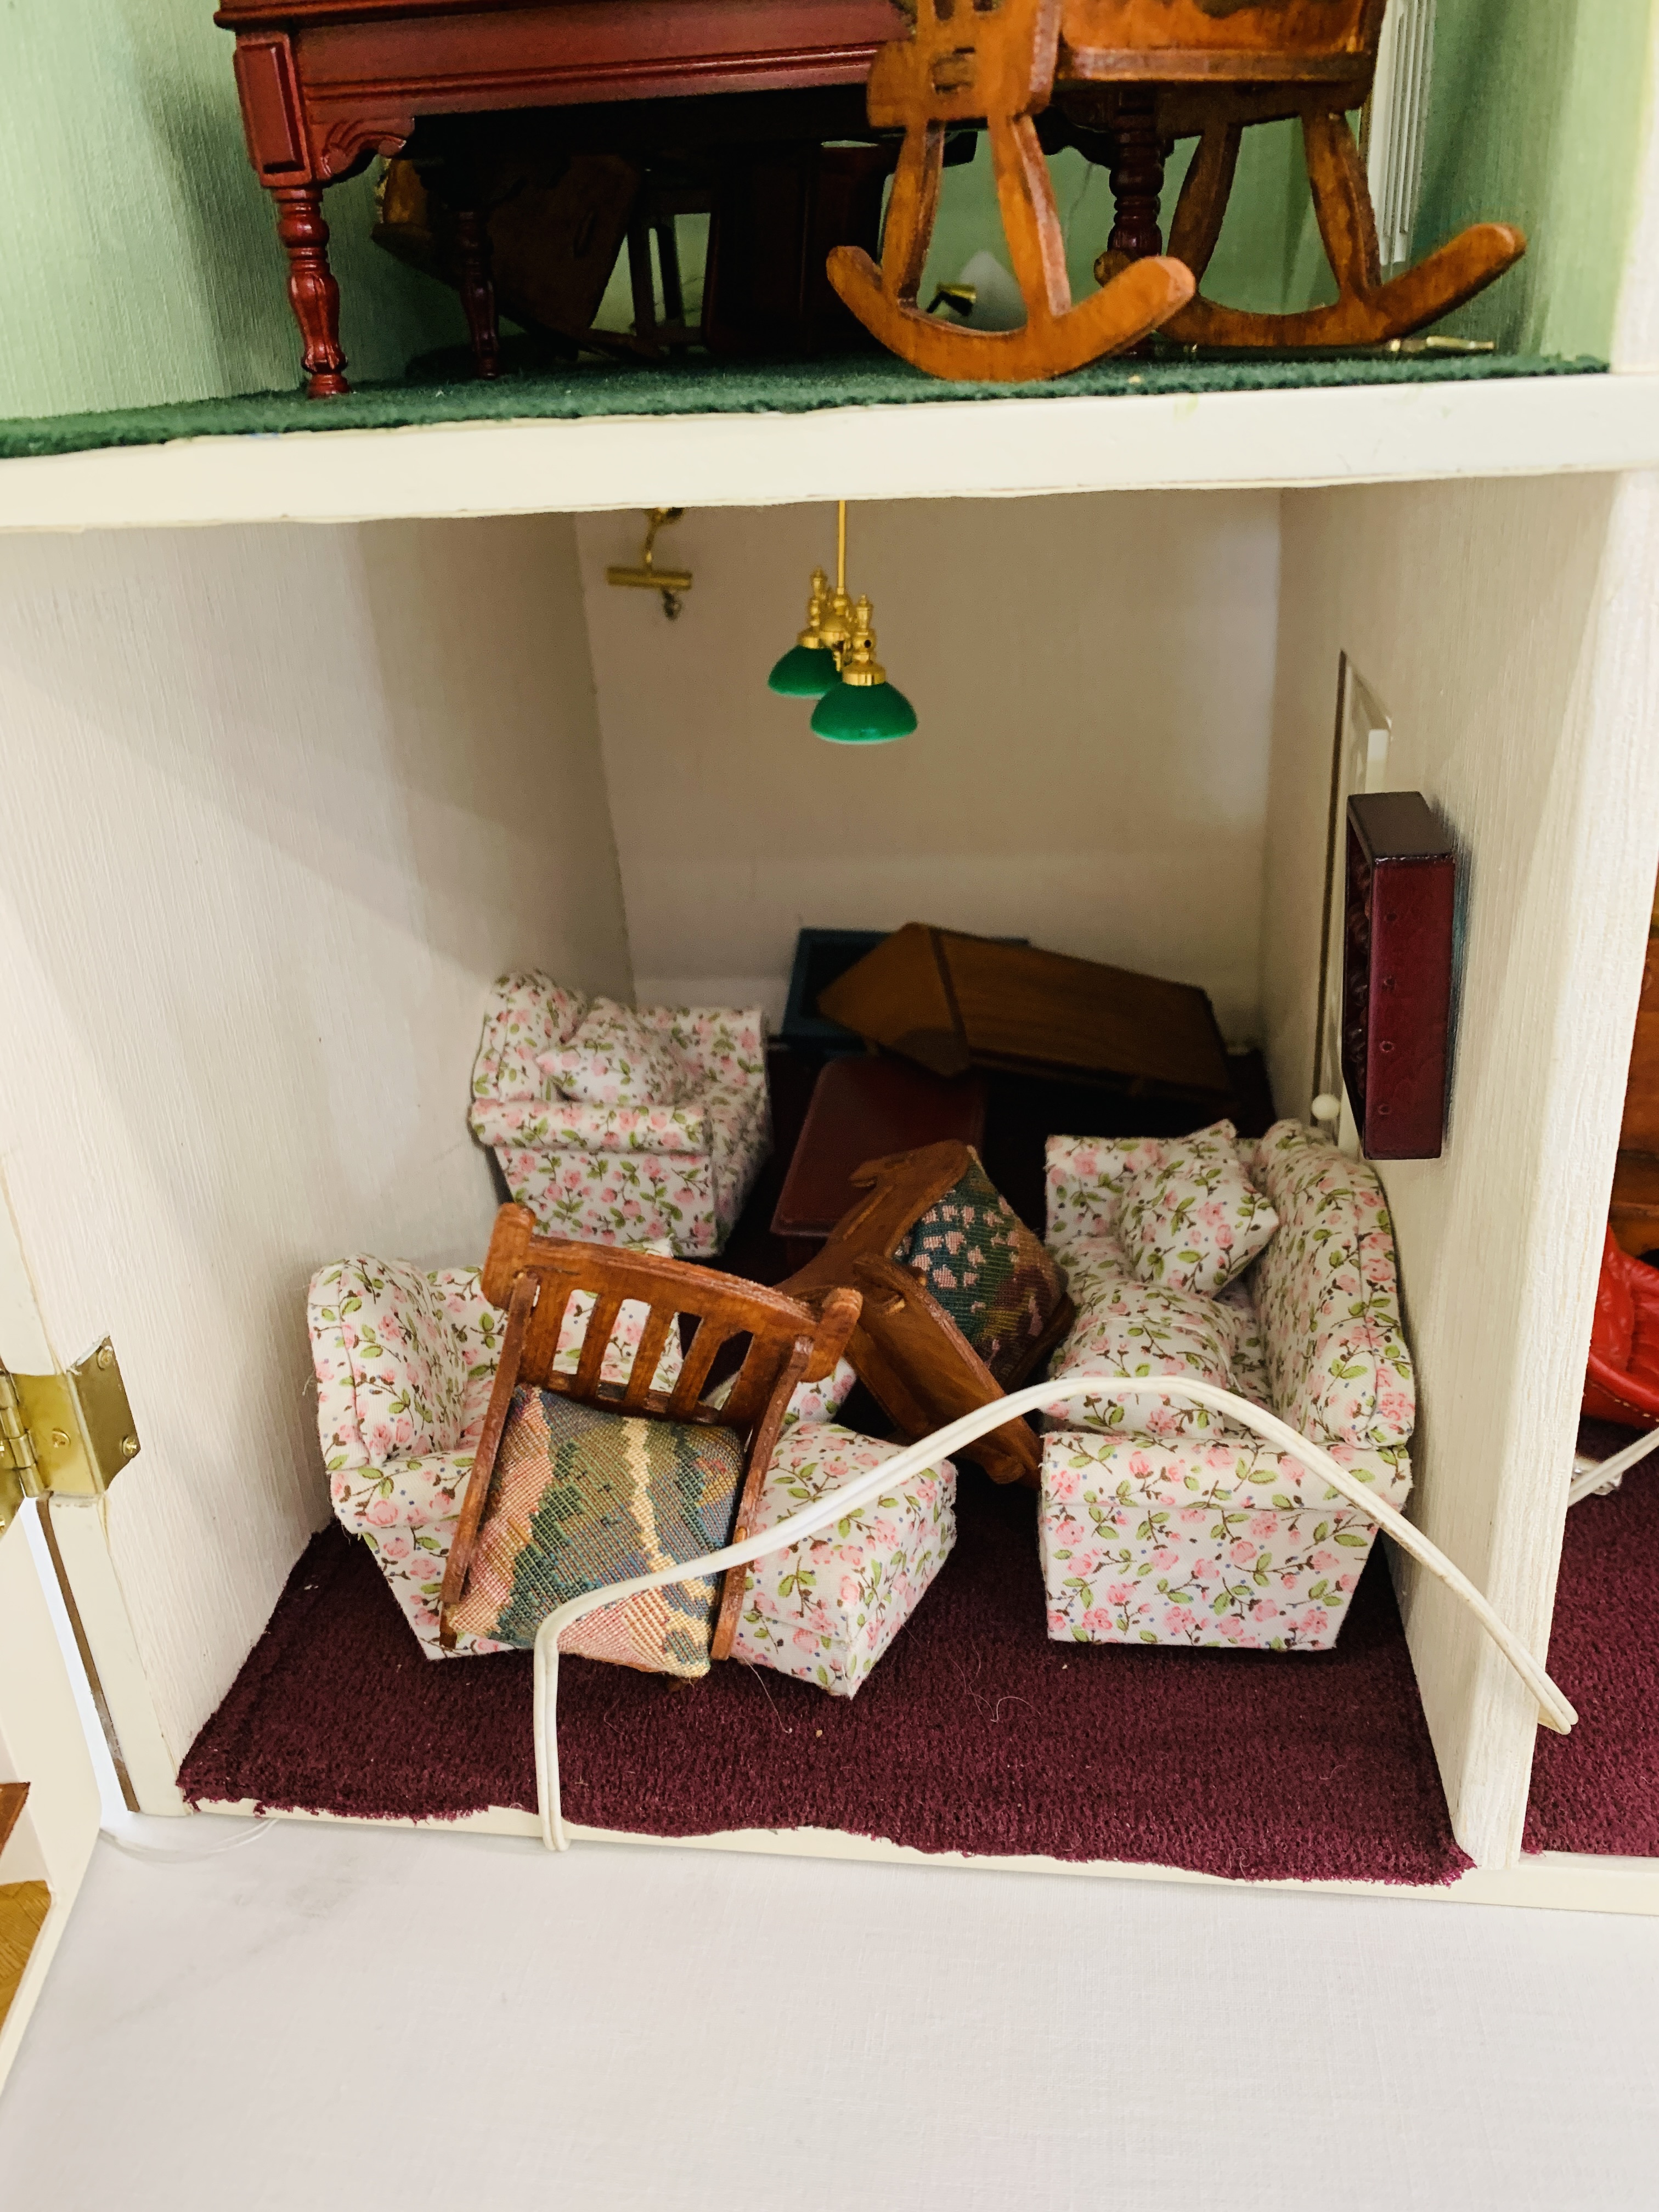 THREE STOREY DOLLS HOUSE ALONG WITH VARIOUS MINIATURE DOLLS HOUSE FURNITURE H 69CM, W 59CM, D 42CM. - Image 10 of 12